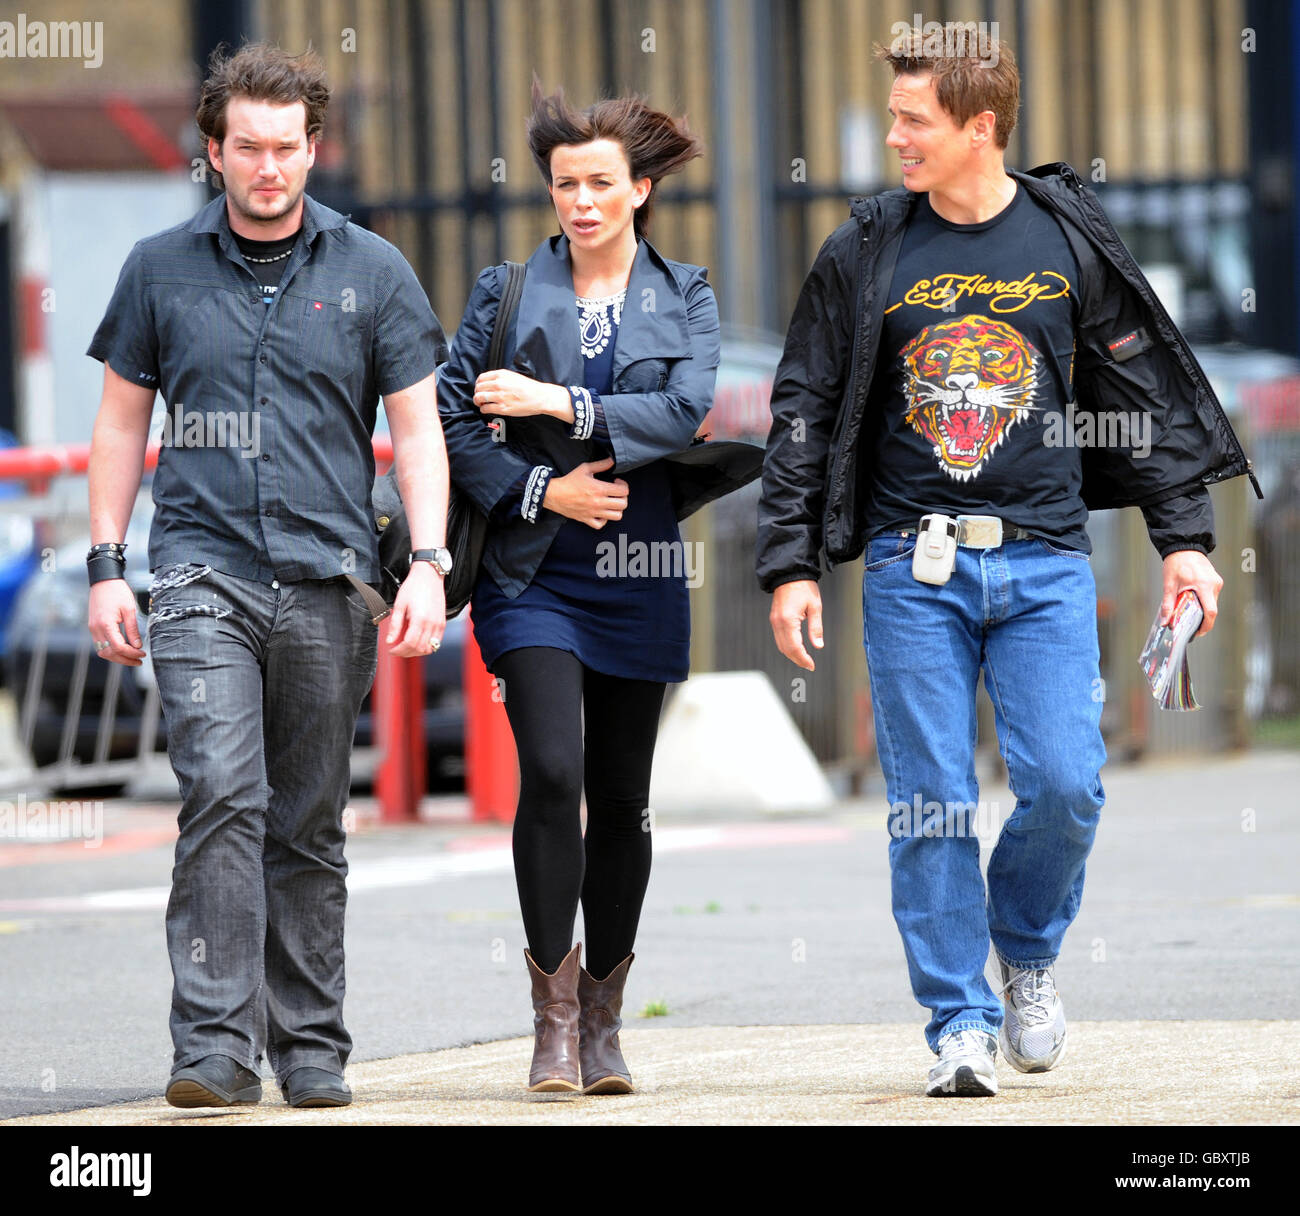 The cast of Torchwood 'Children of Earth', (left to right) Gareth David- Lloyd, Eve Myles and John Barrowman, depart London for Cardiff at London  Heliport after the London launch of the DVD and